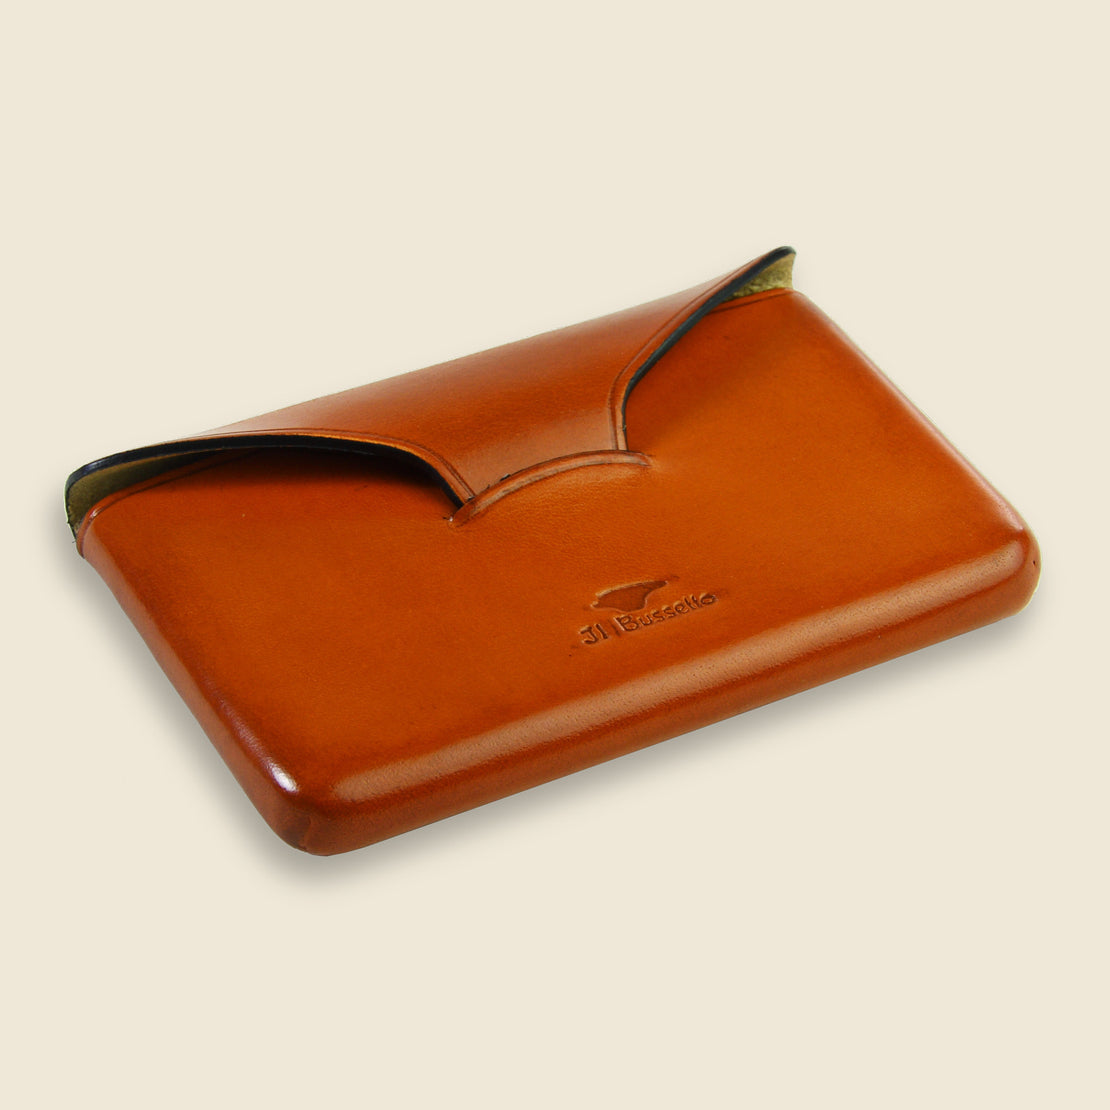 Business Card Holder - Orange - Il Bussetto - STAG Provisions - Accessories - Wallets